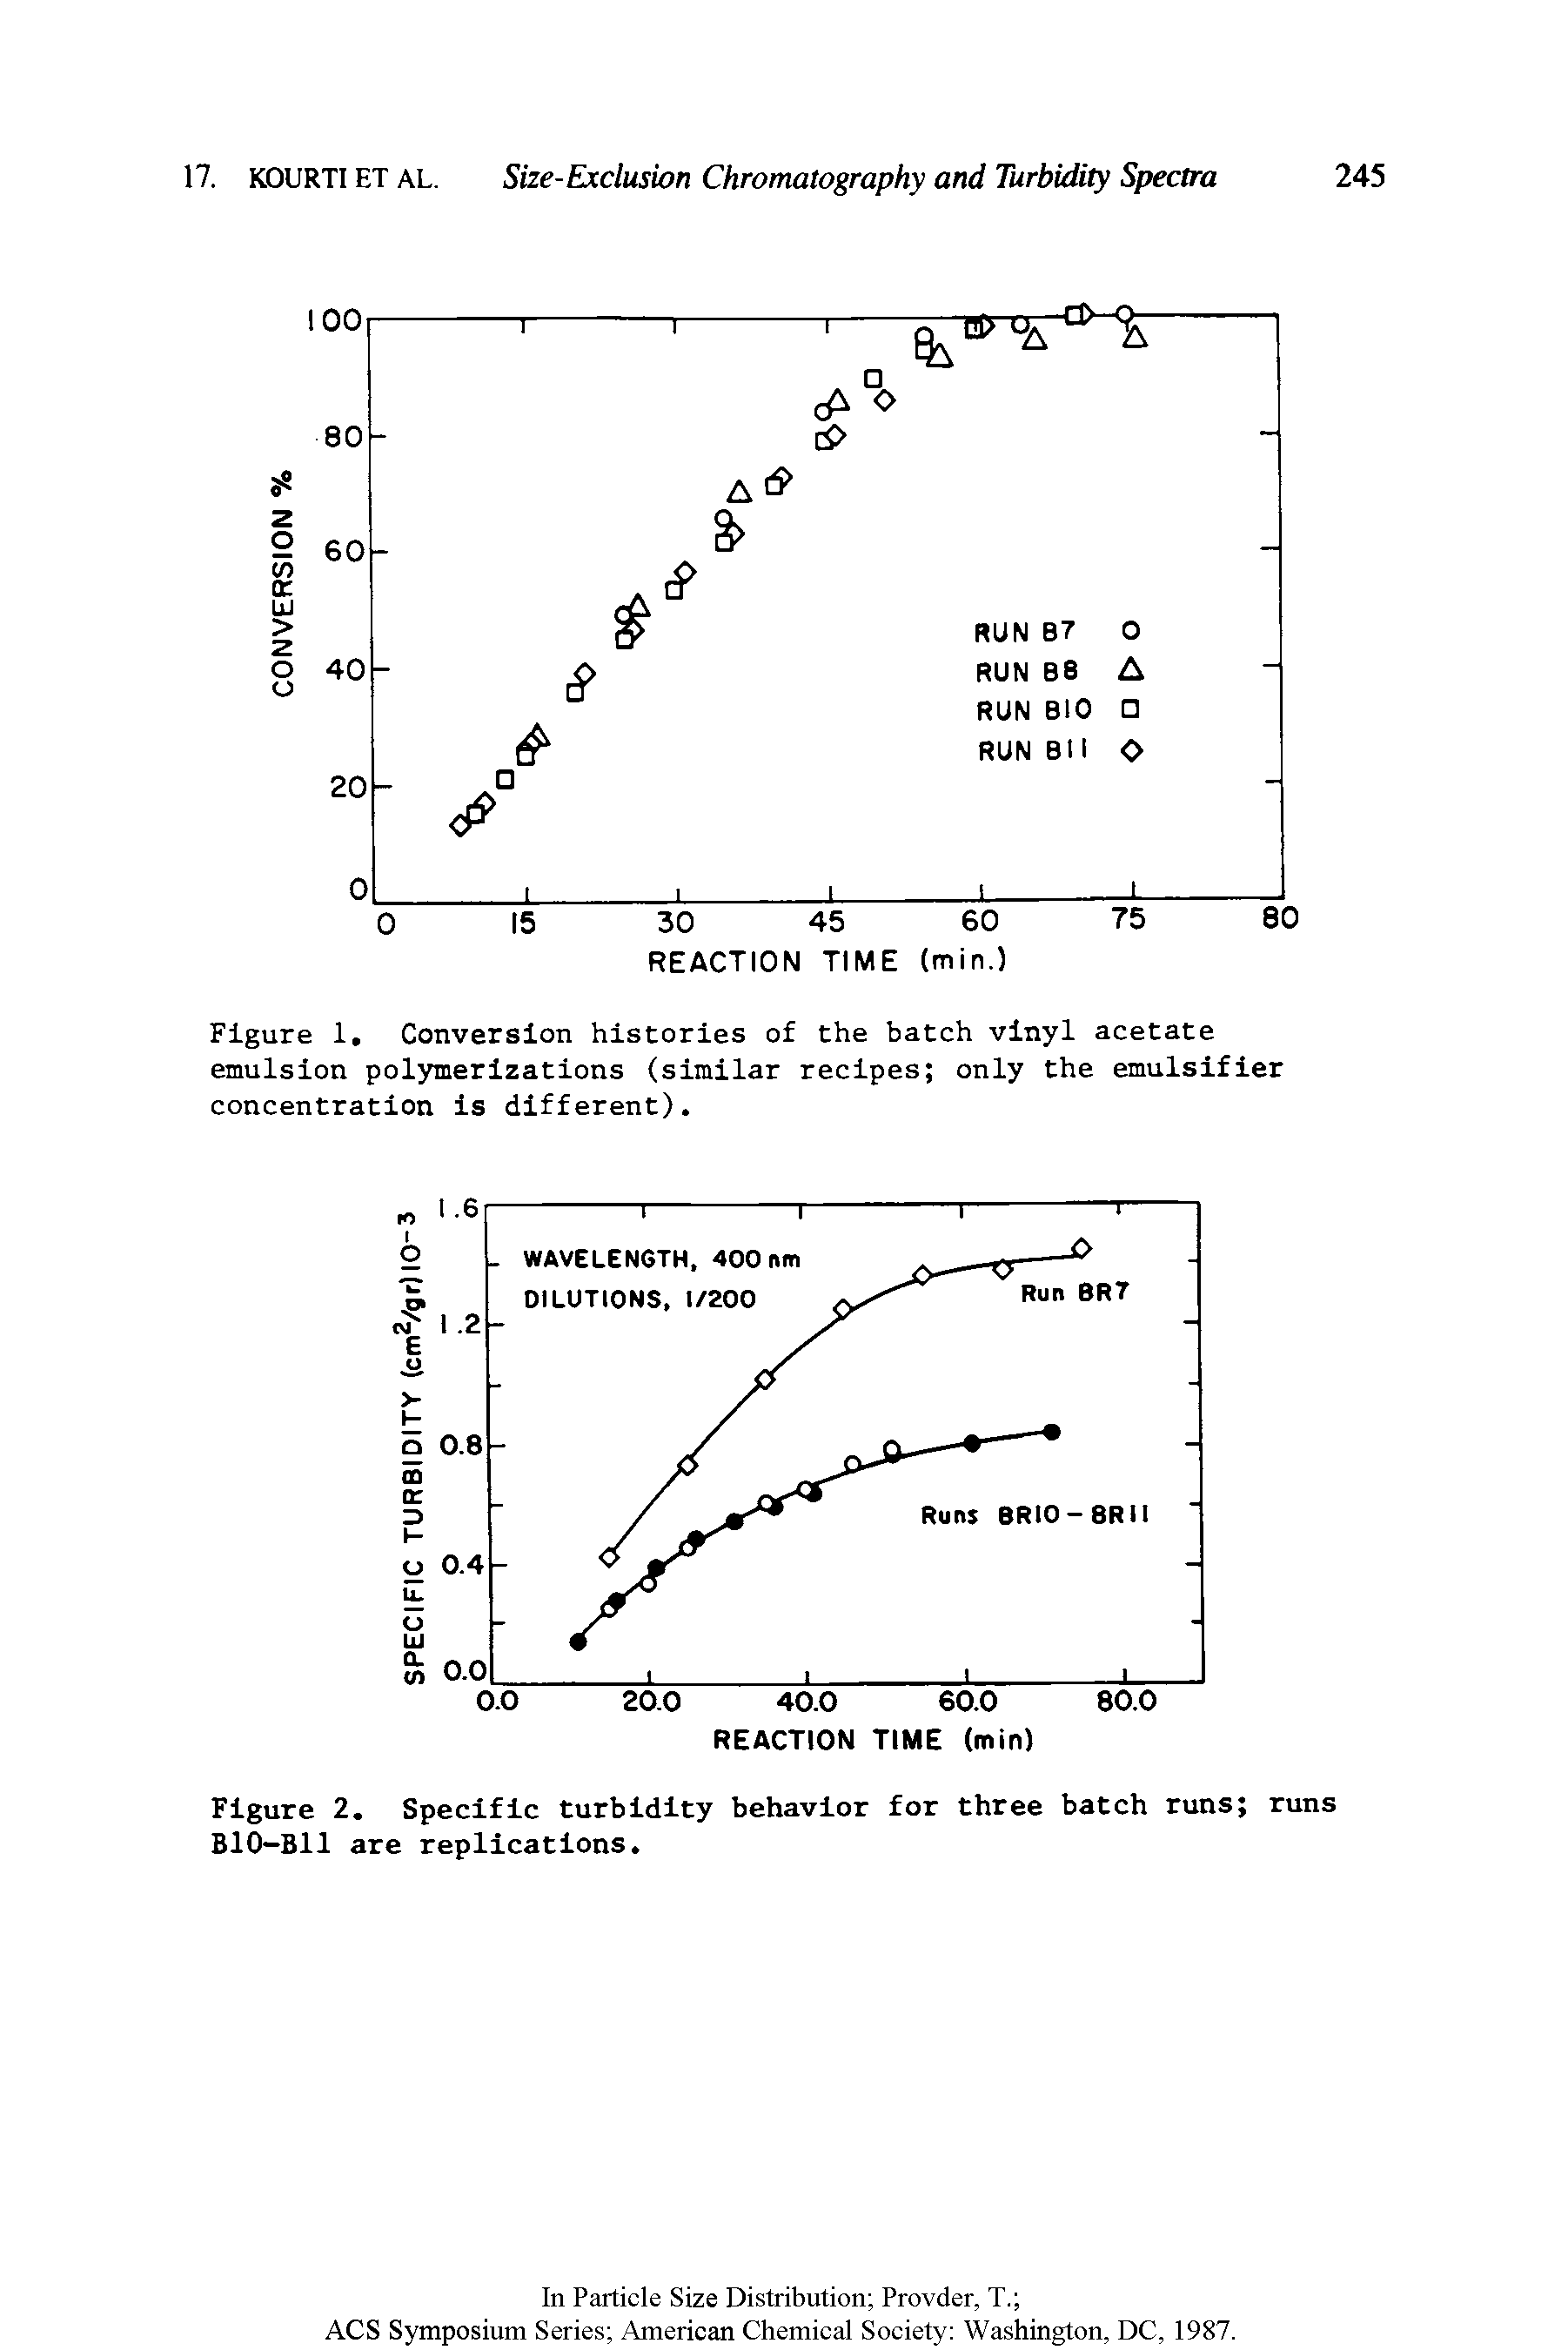 Figure 1. Conversion histories of the batch vinyl acetate emulsion polymerizations (similar recipes only the emulsifier concentration is different).